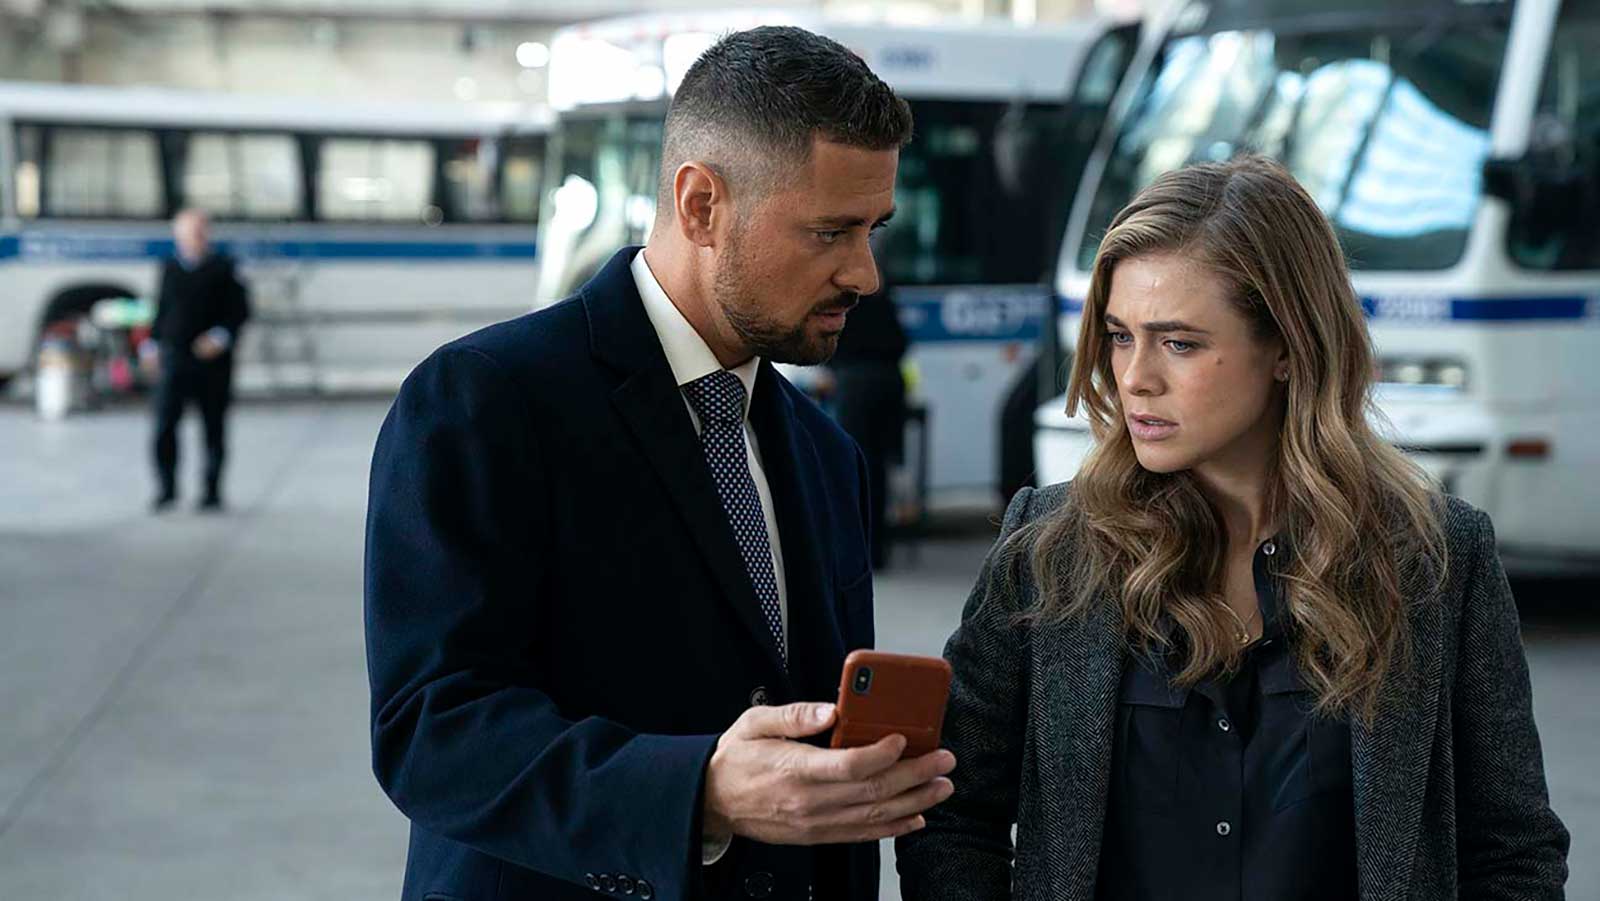 did manifest get cancelled